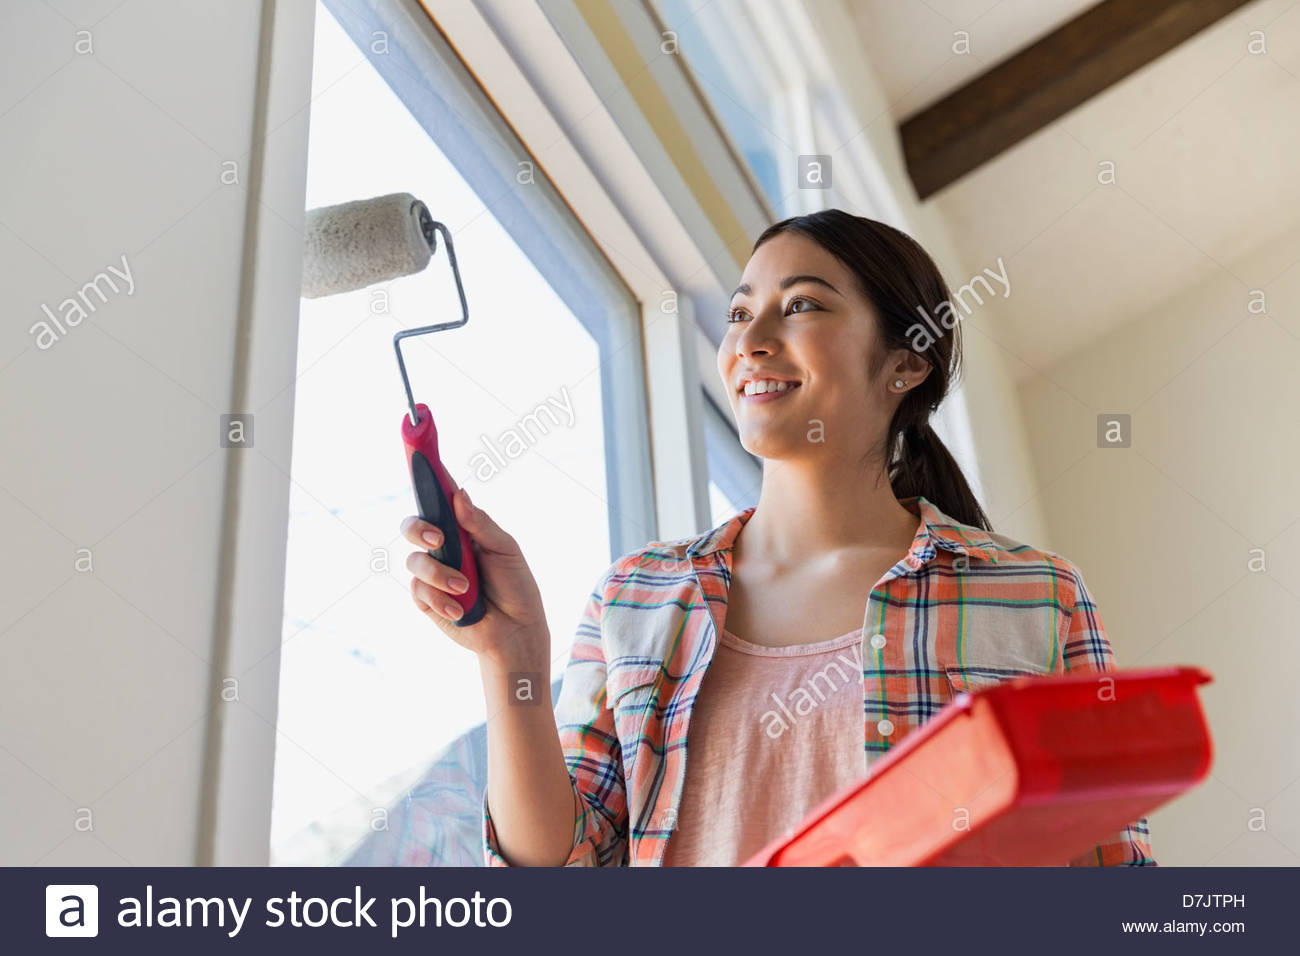 Young woman painting wall at home Stock Photo